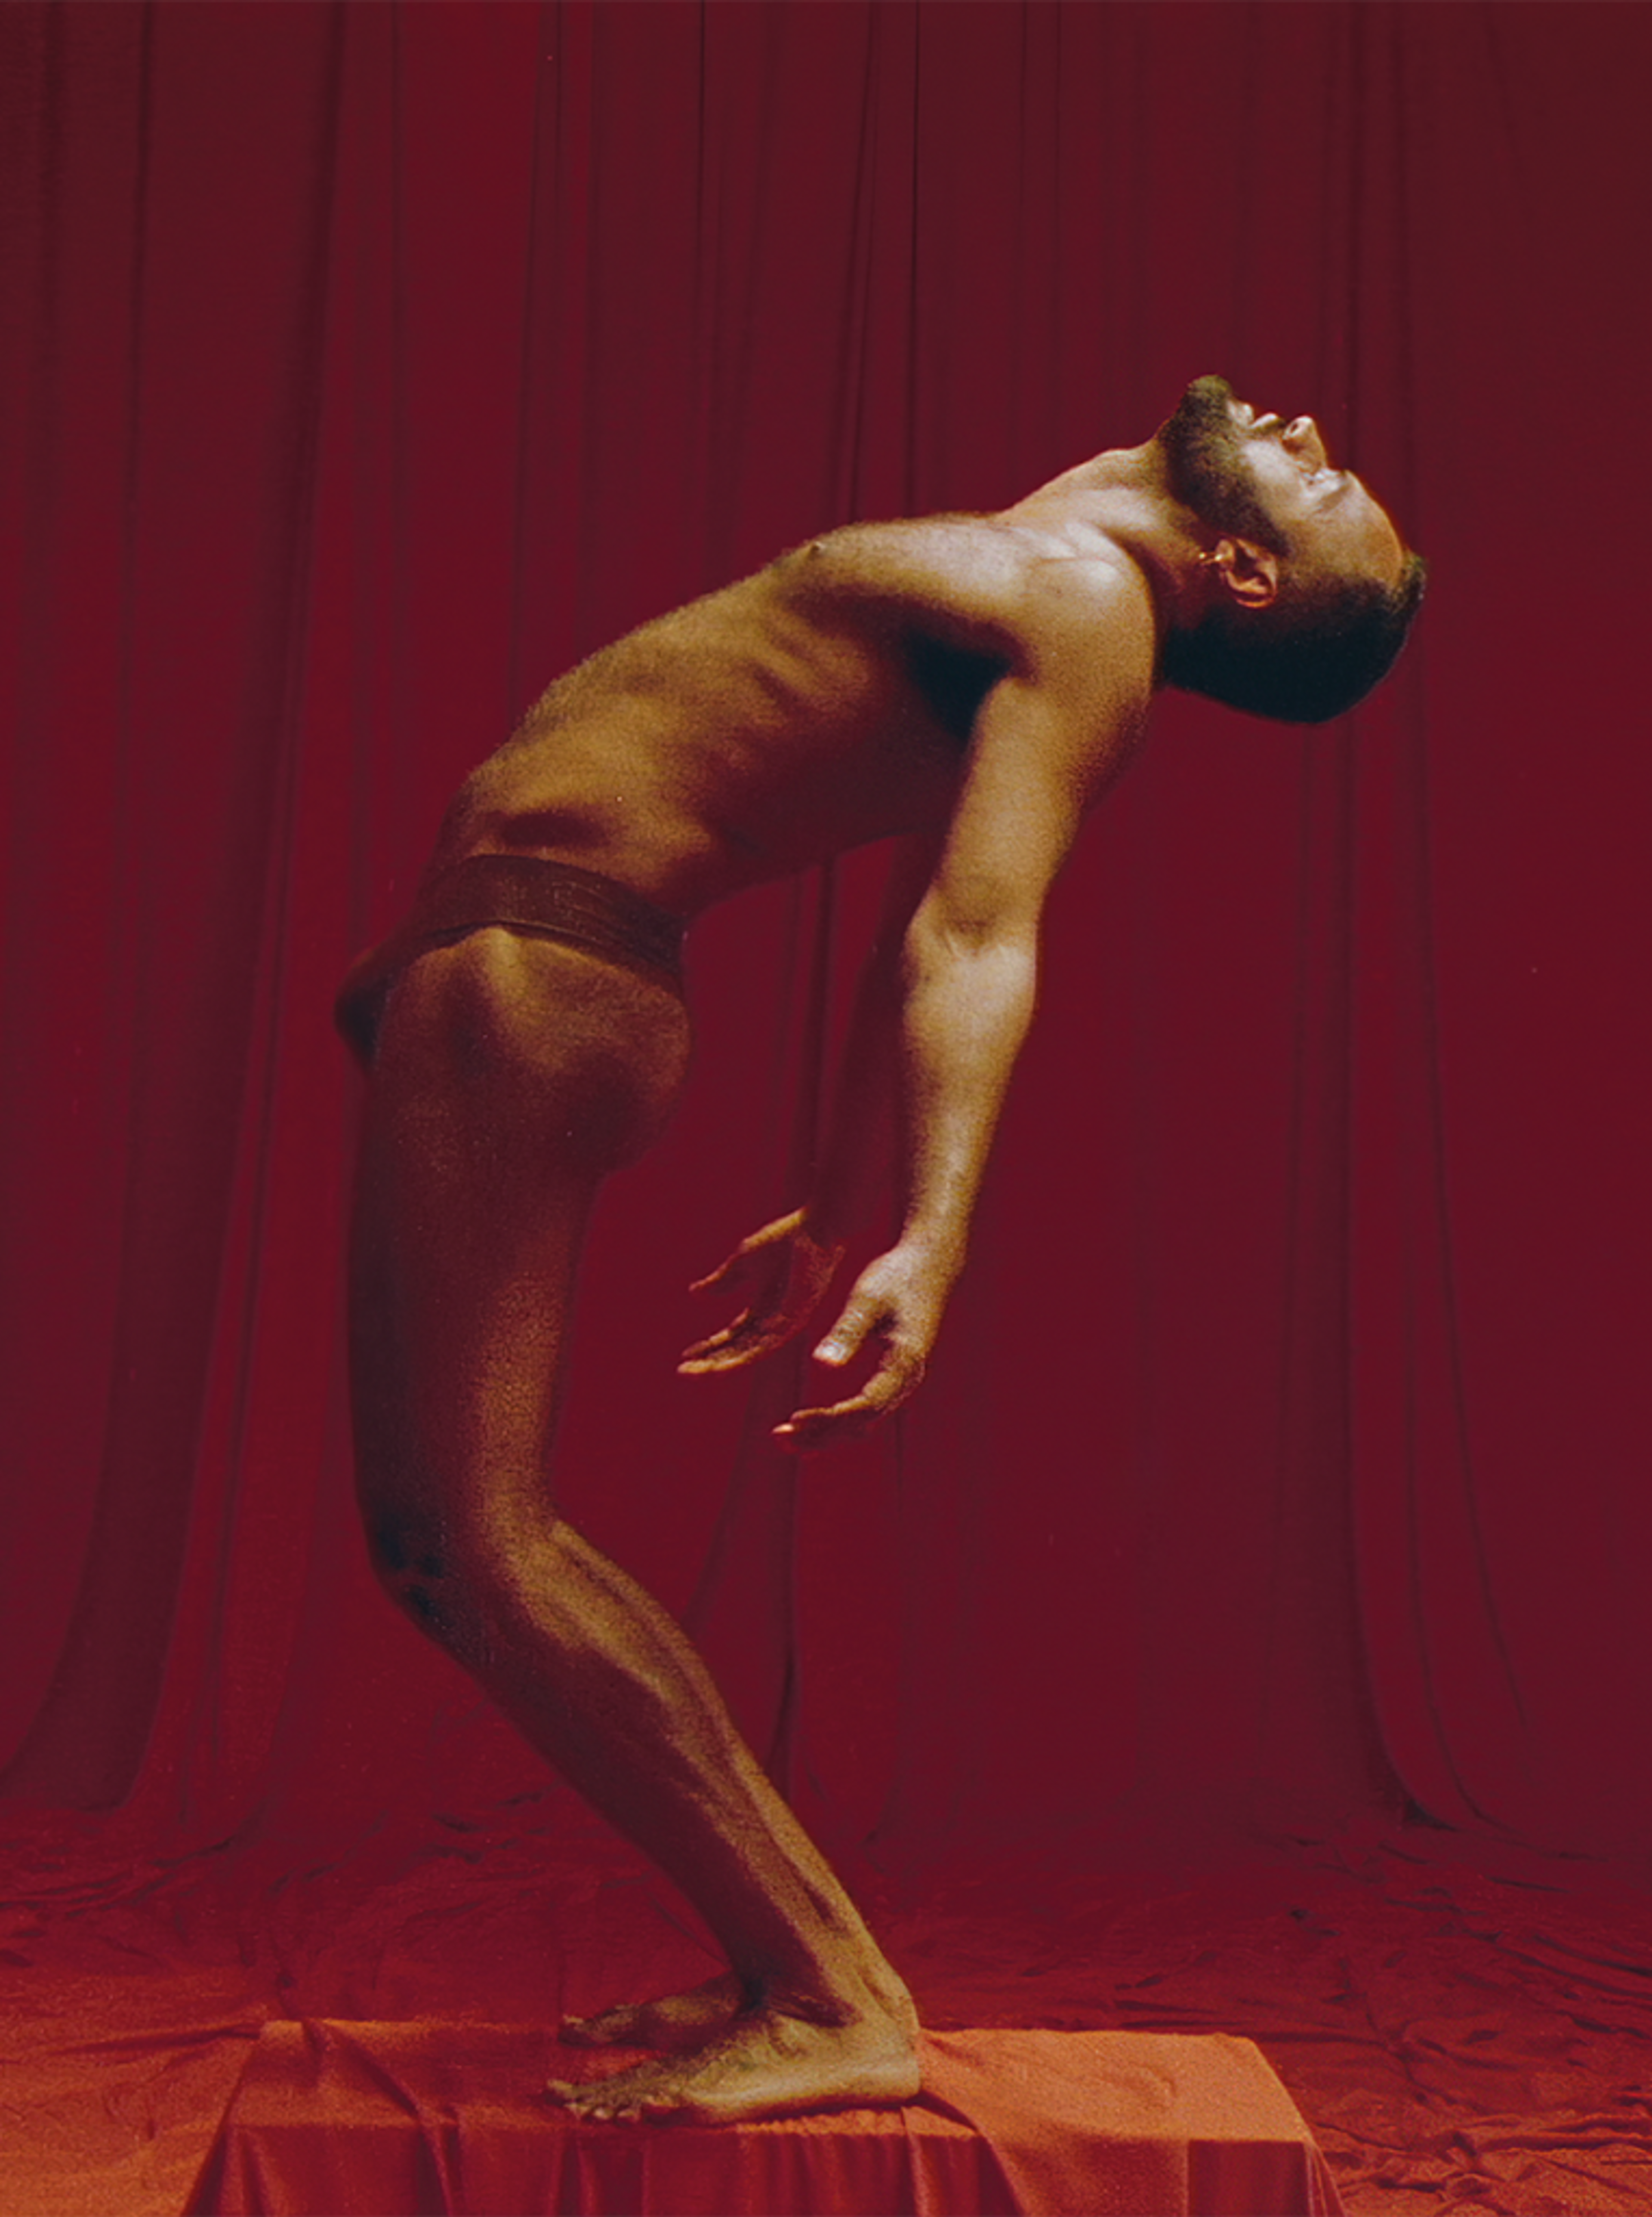 Image of a male identifying figure posing in the nude with a red backdrop.